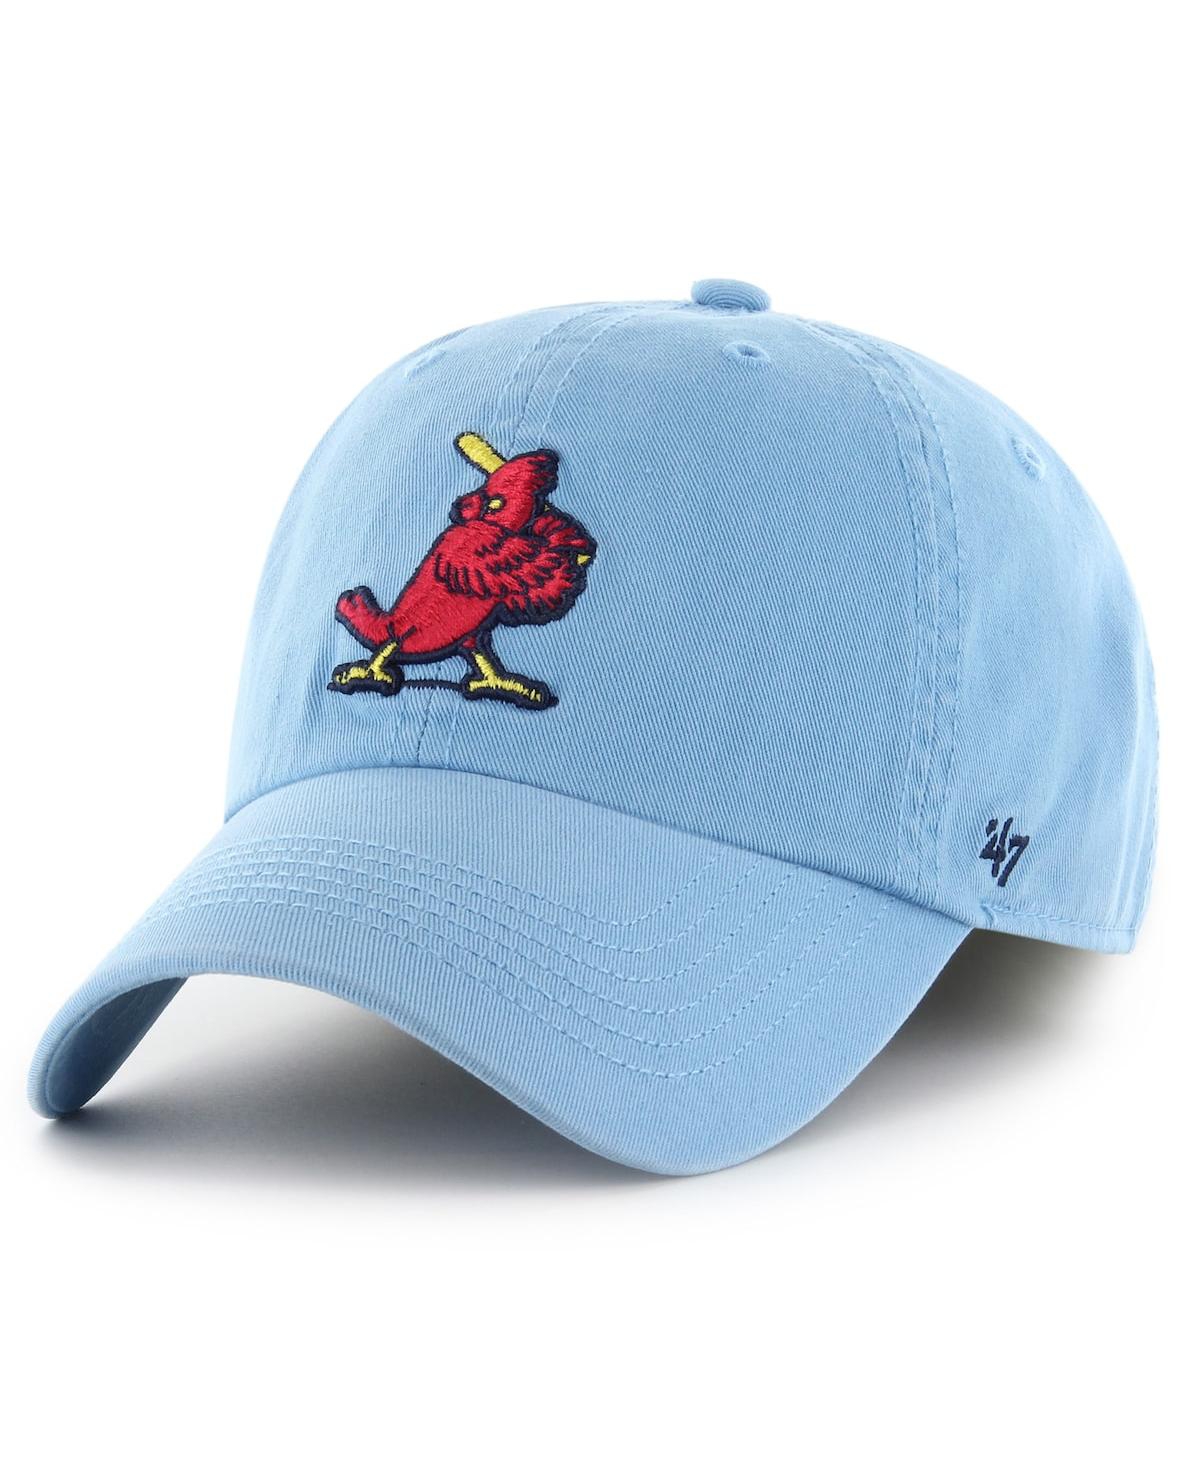 Men's '47 Brand Light Blue St. Louis Cardinals Cooperstown Collection Franchise Fitted Hat - Light Blue